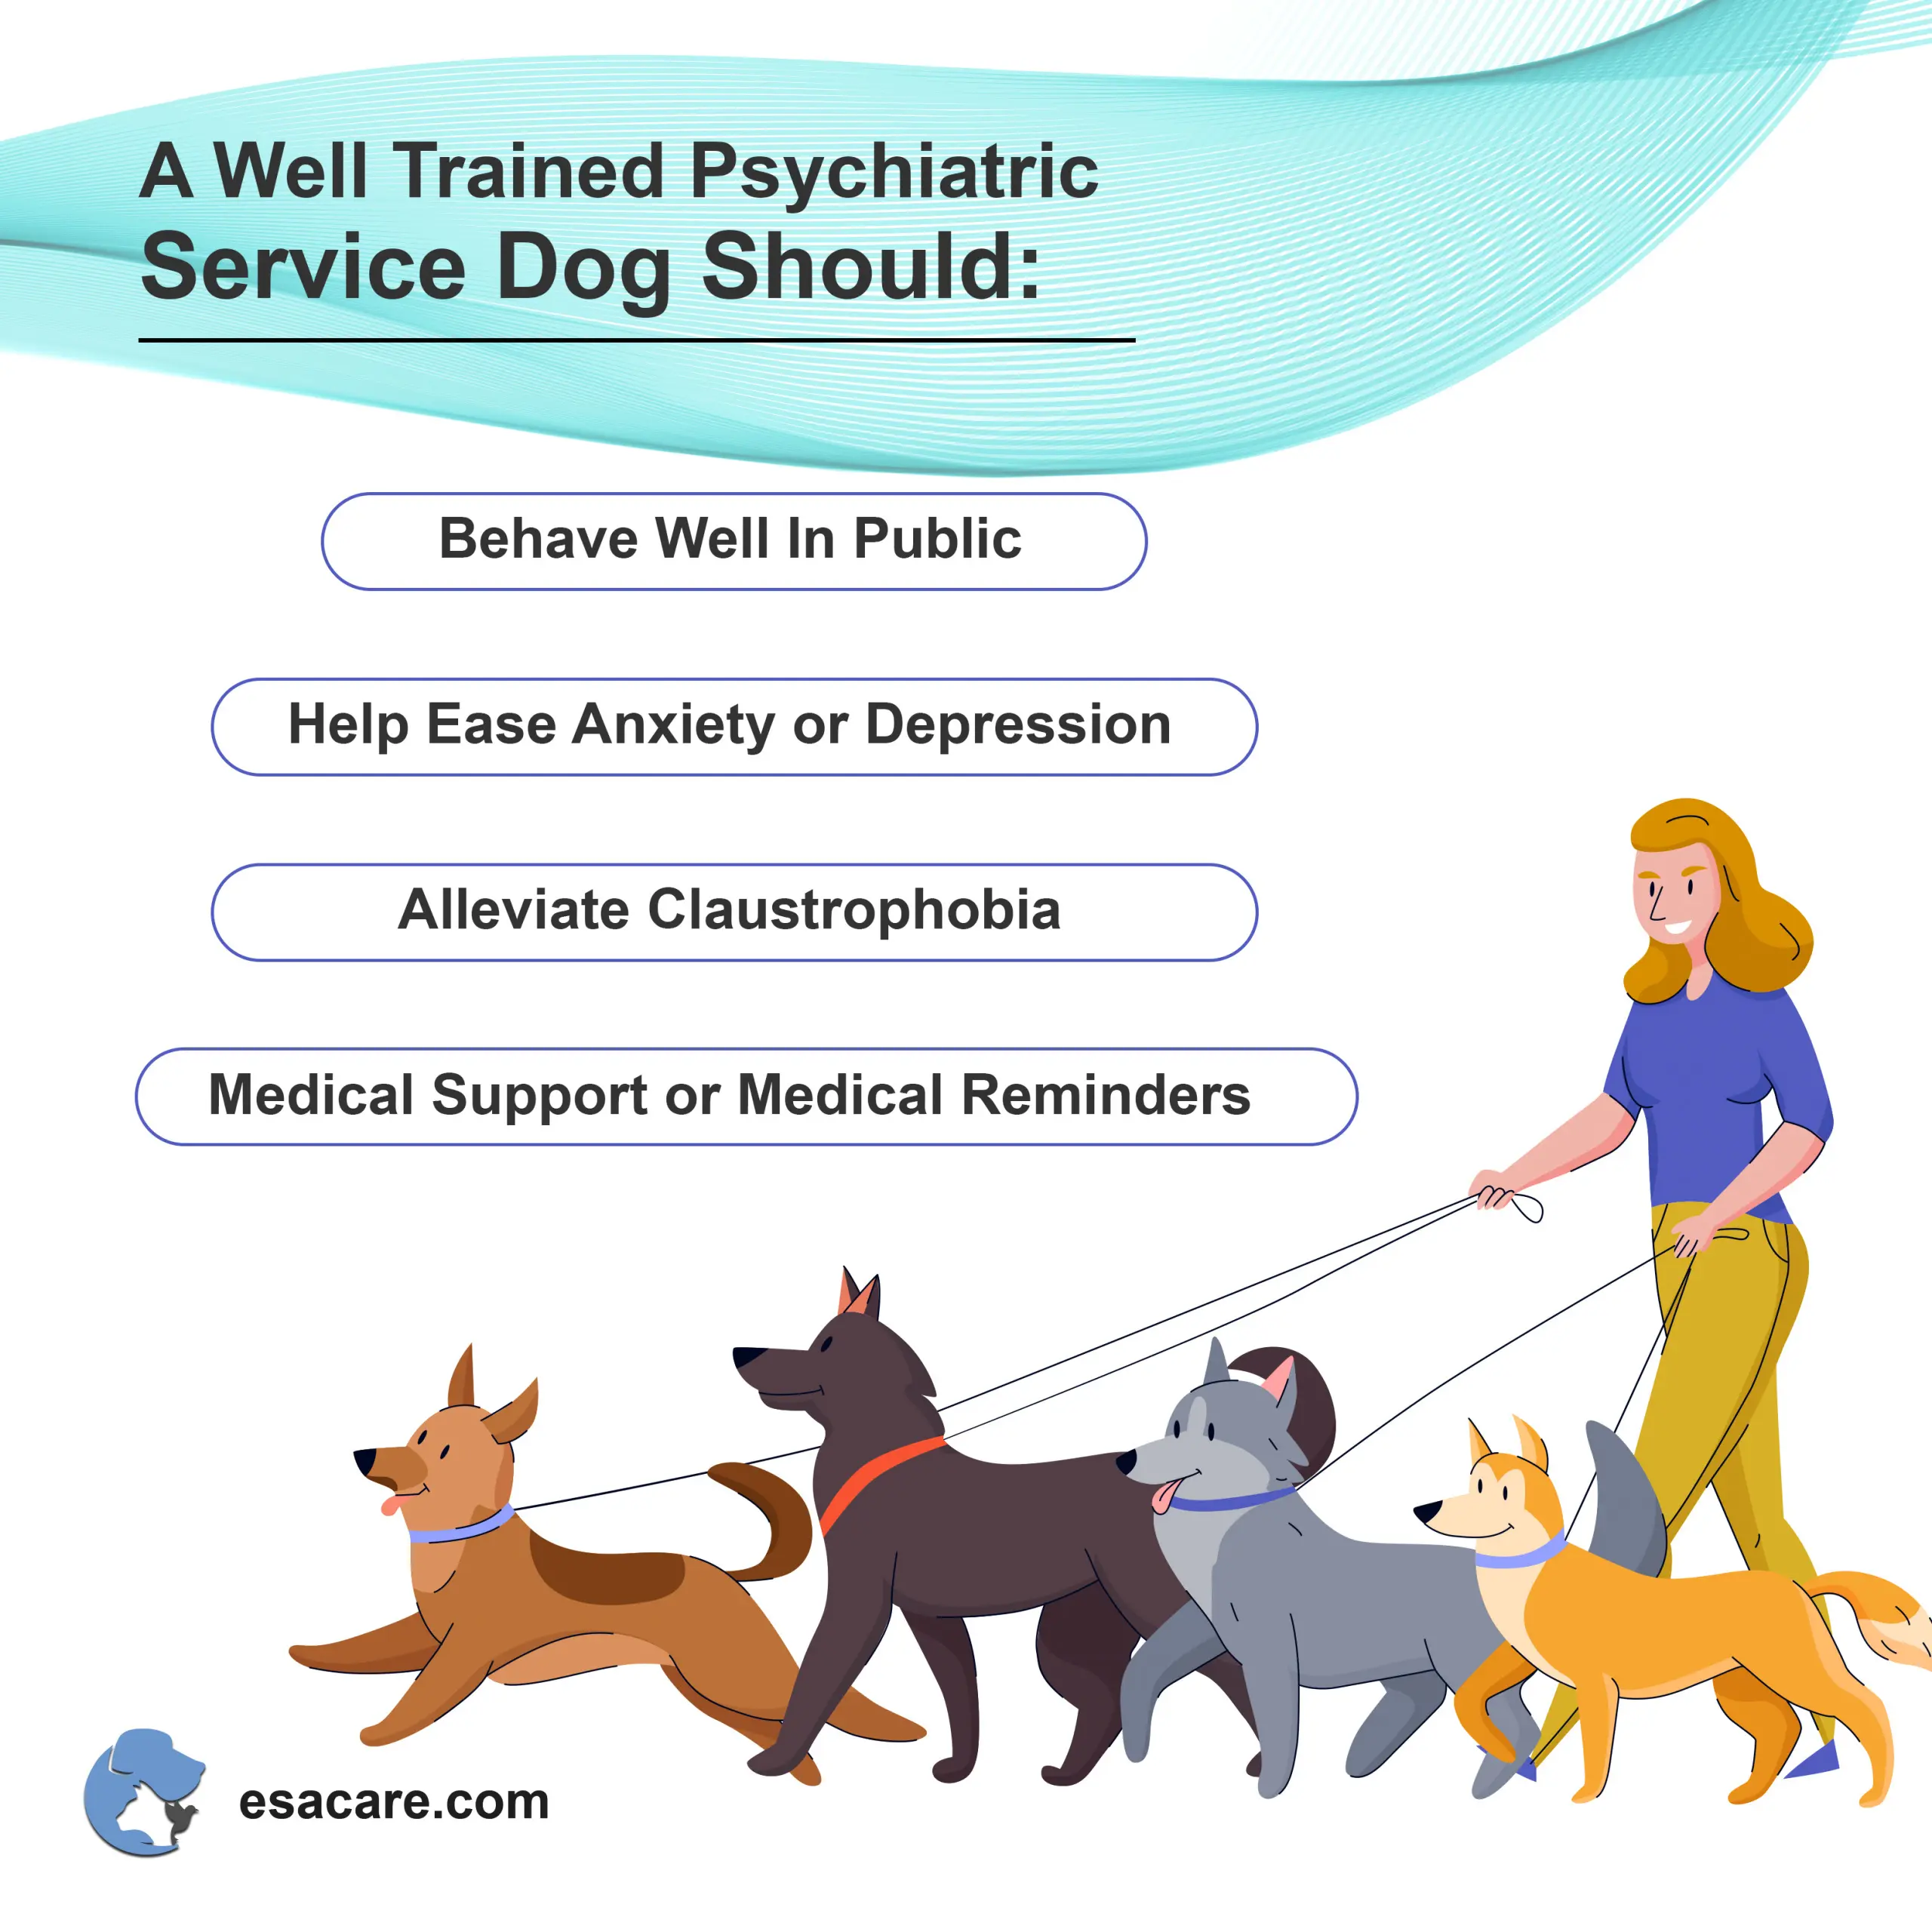 https://esacare.com/wp-content/uploads/2022/01/esacare-10-Crucial-Benefits-of-Psychiatric-Service-Dogs-in-our-Lives-image-2-scaled.jpg.webp